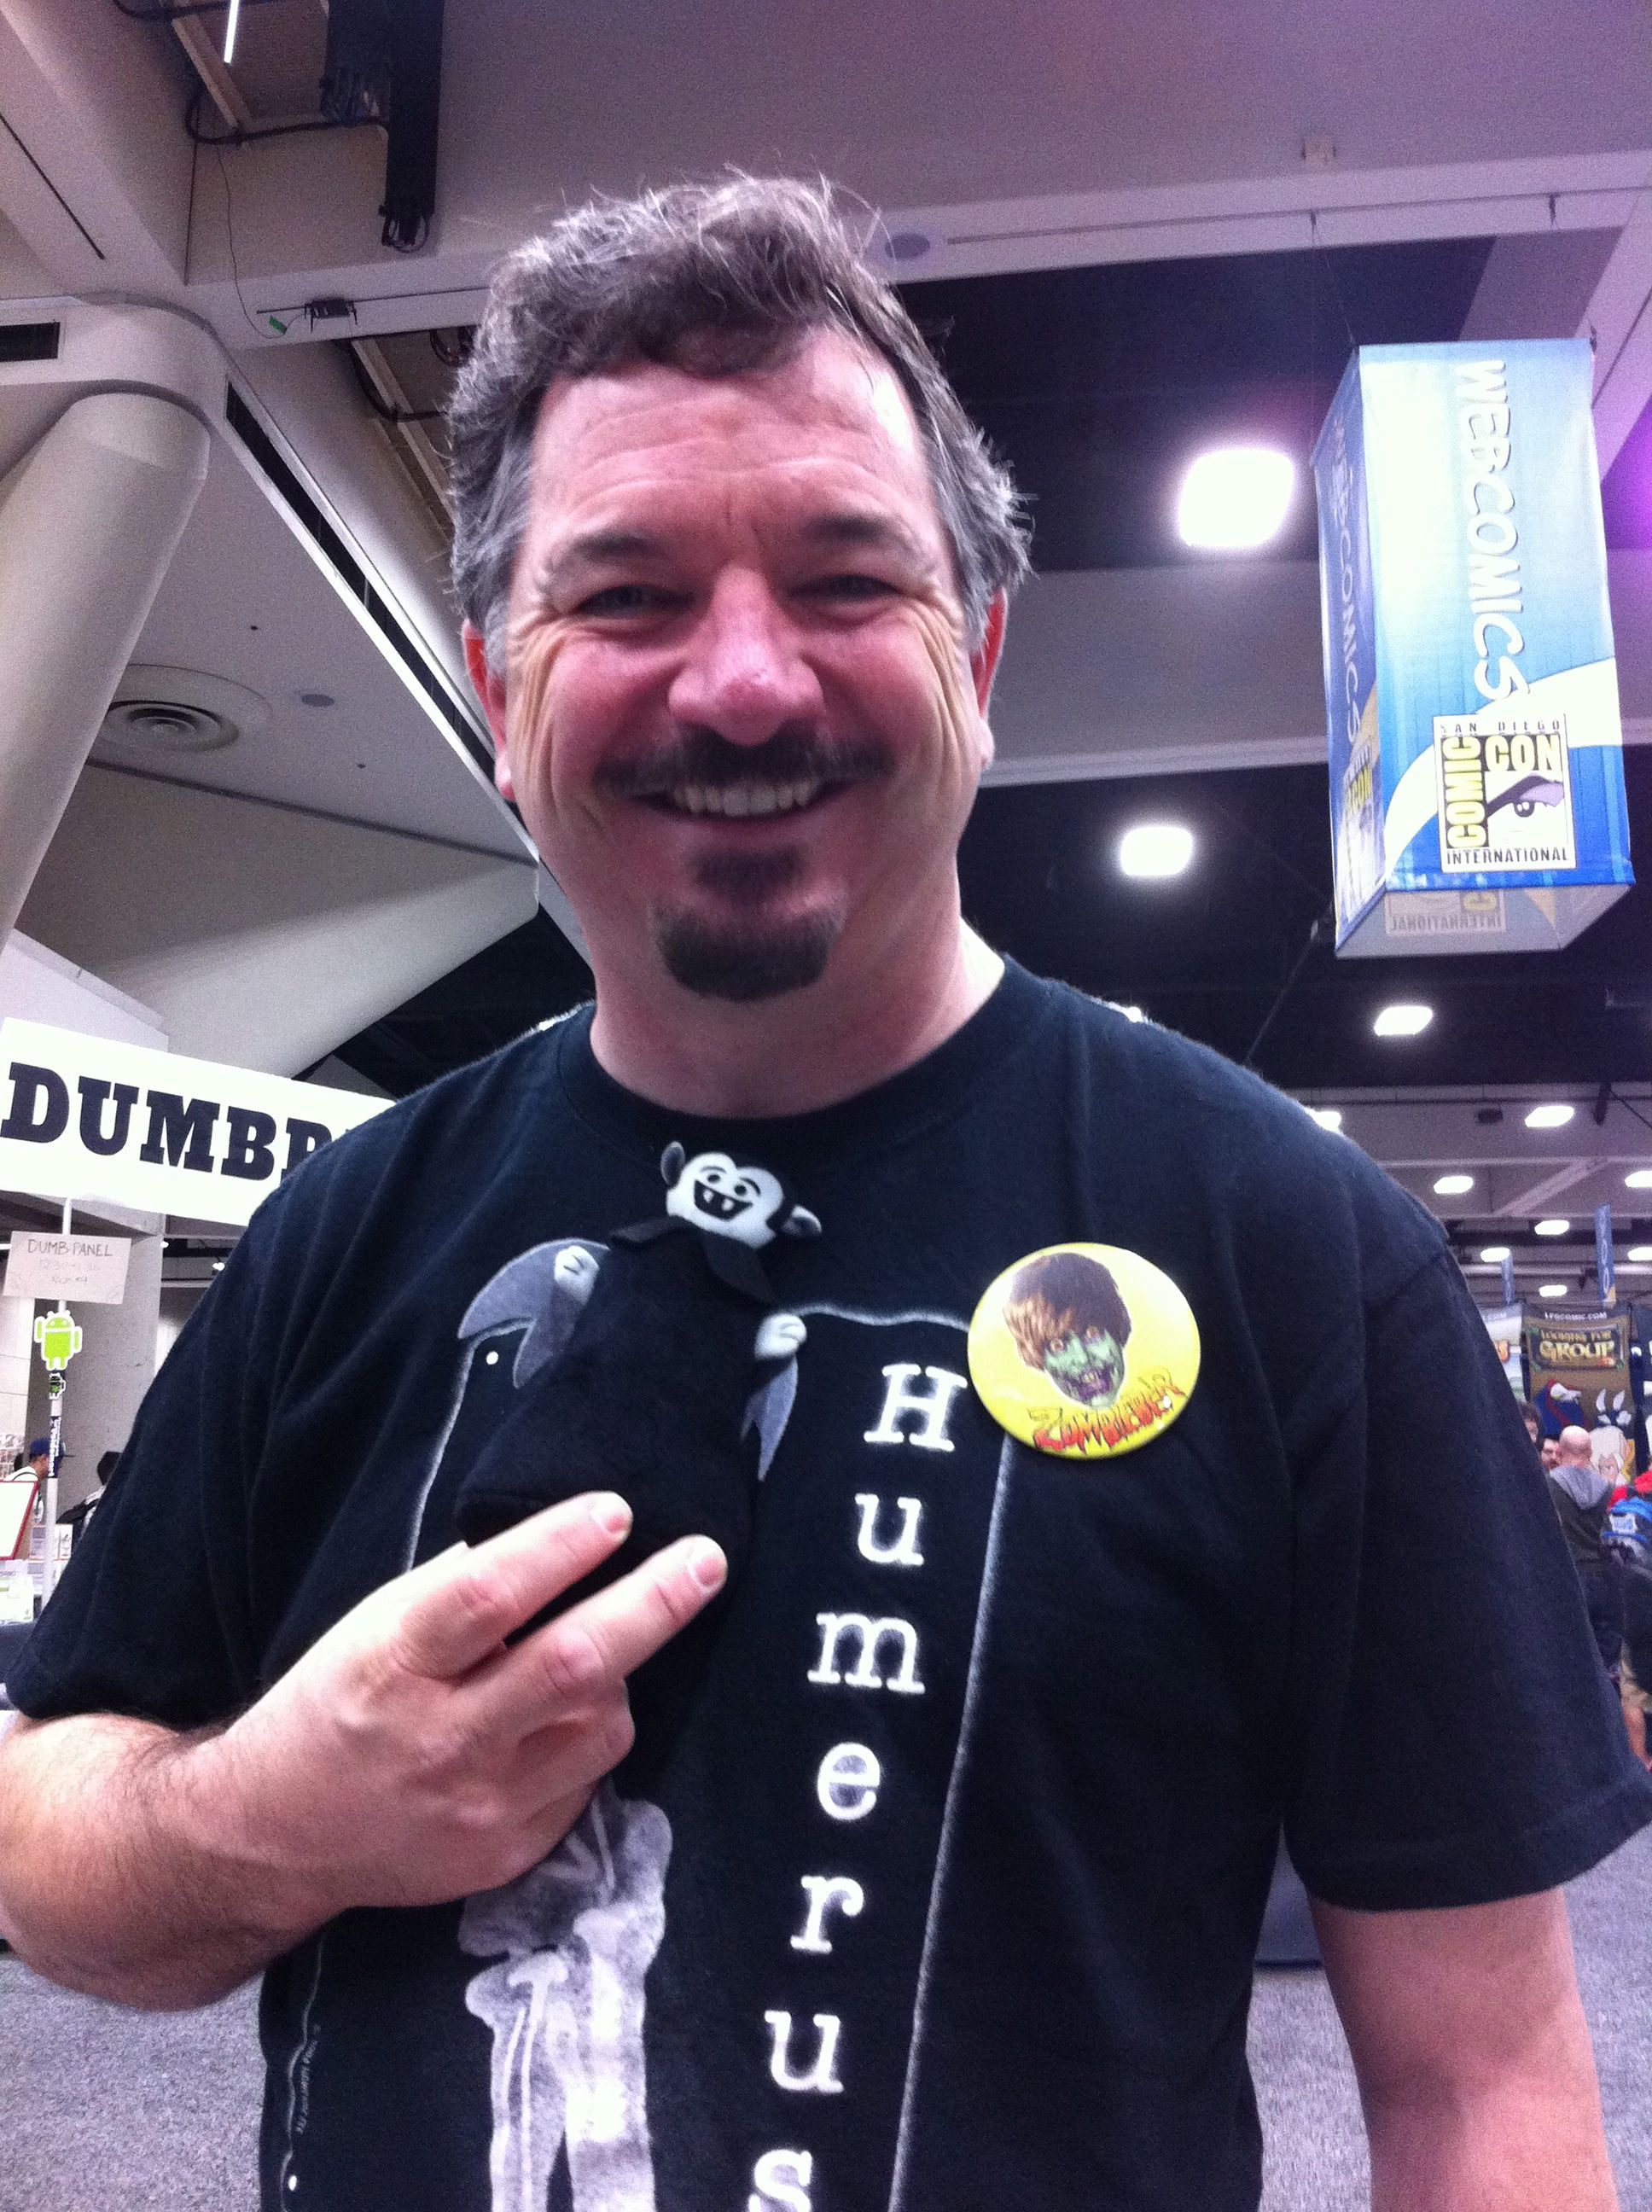 Photo of Brett from Humerus Online holding a Little Vampire plush toy